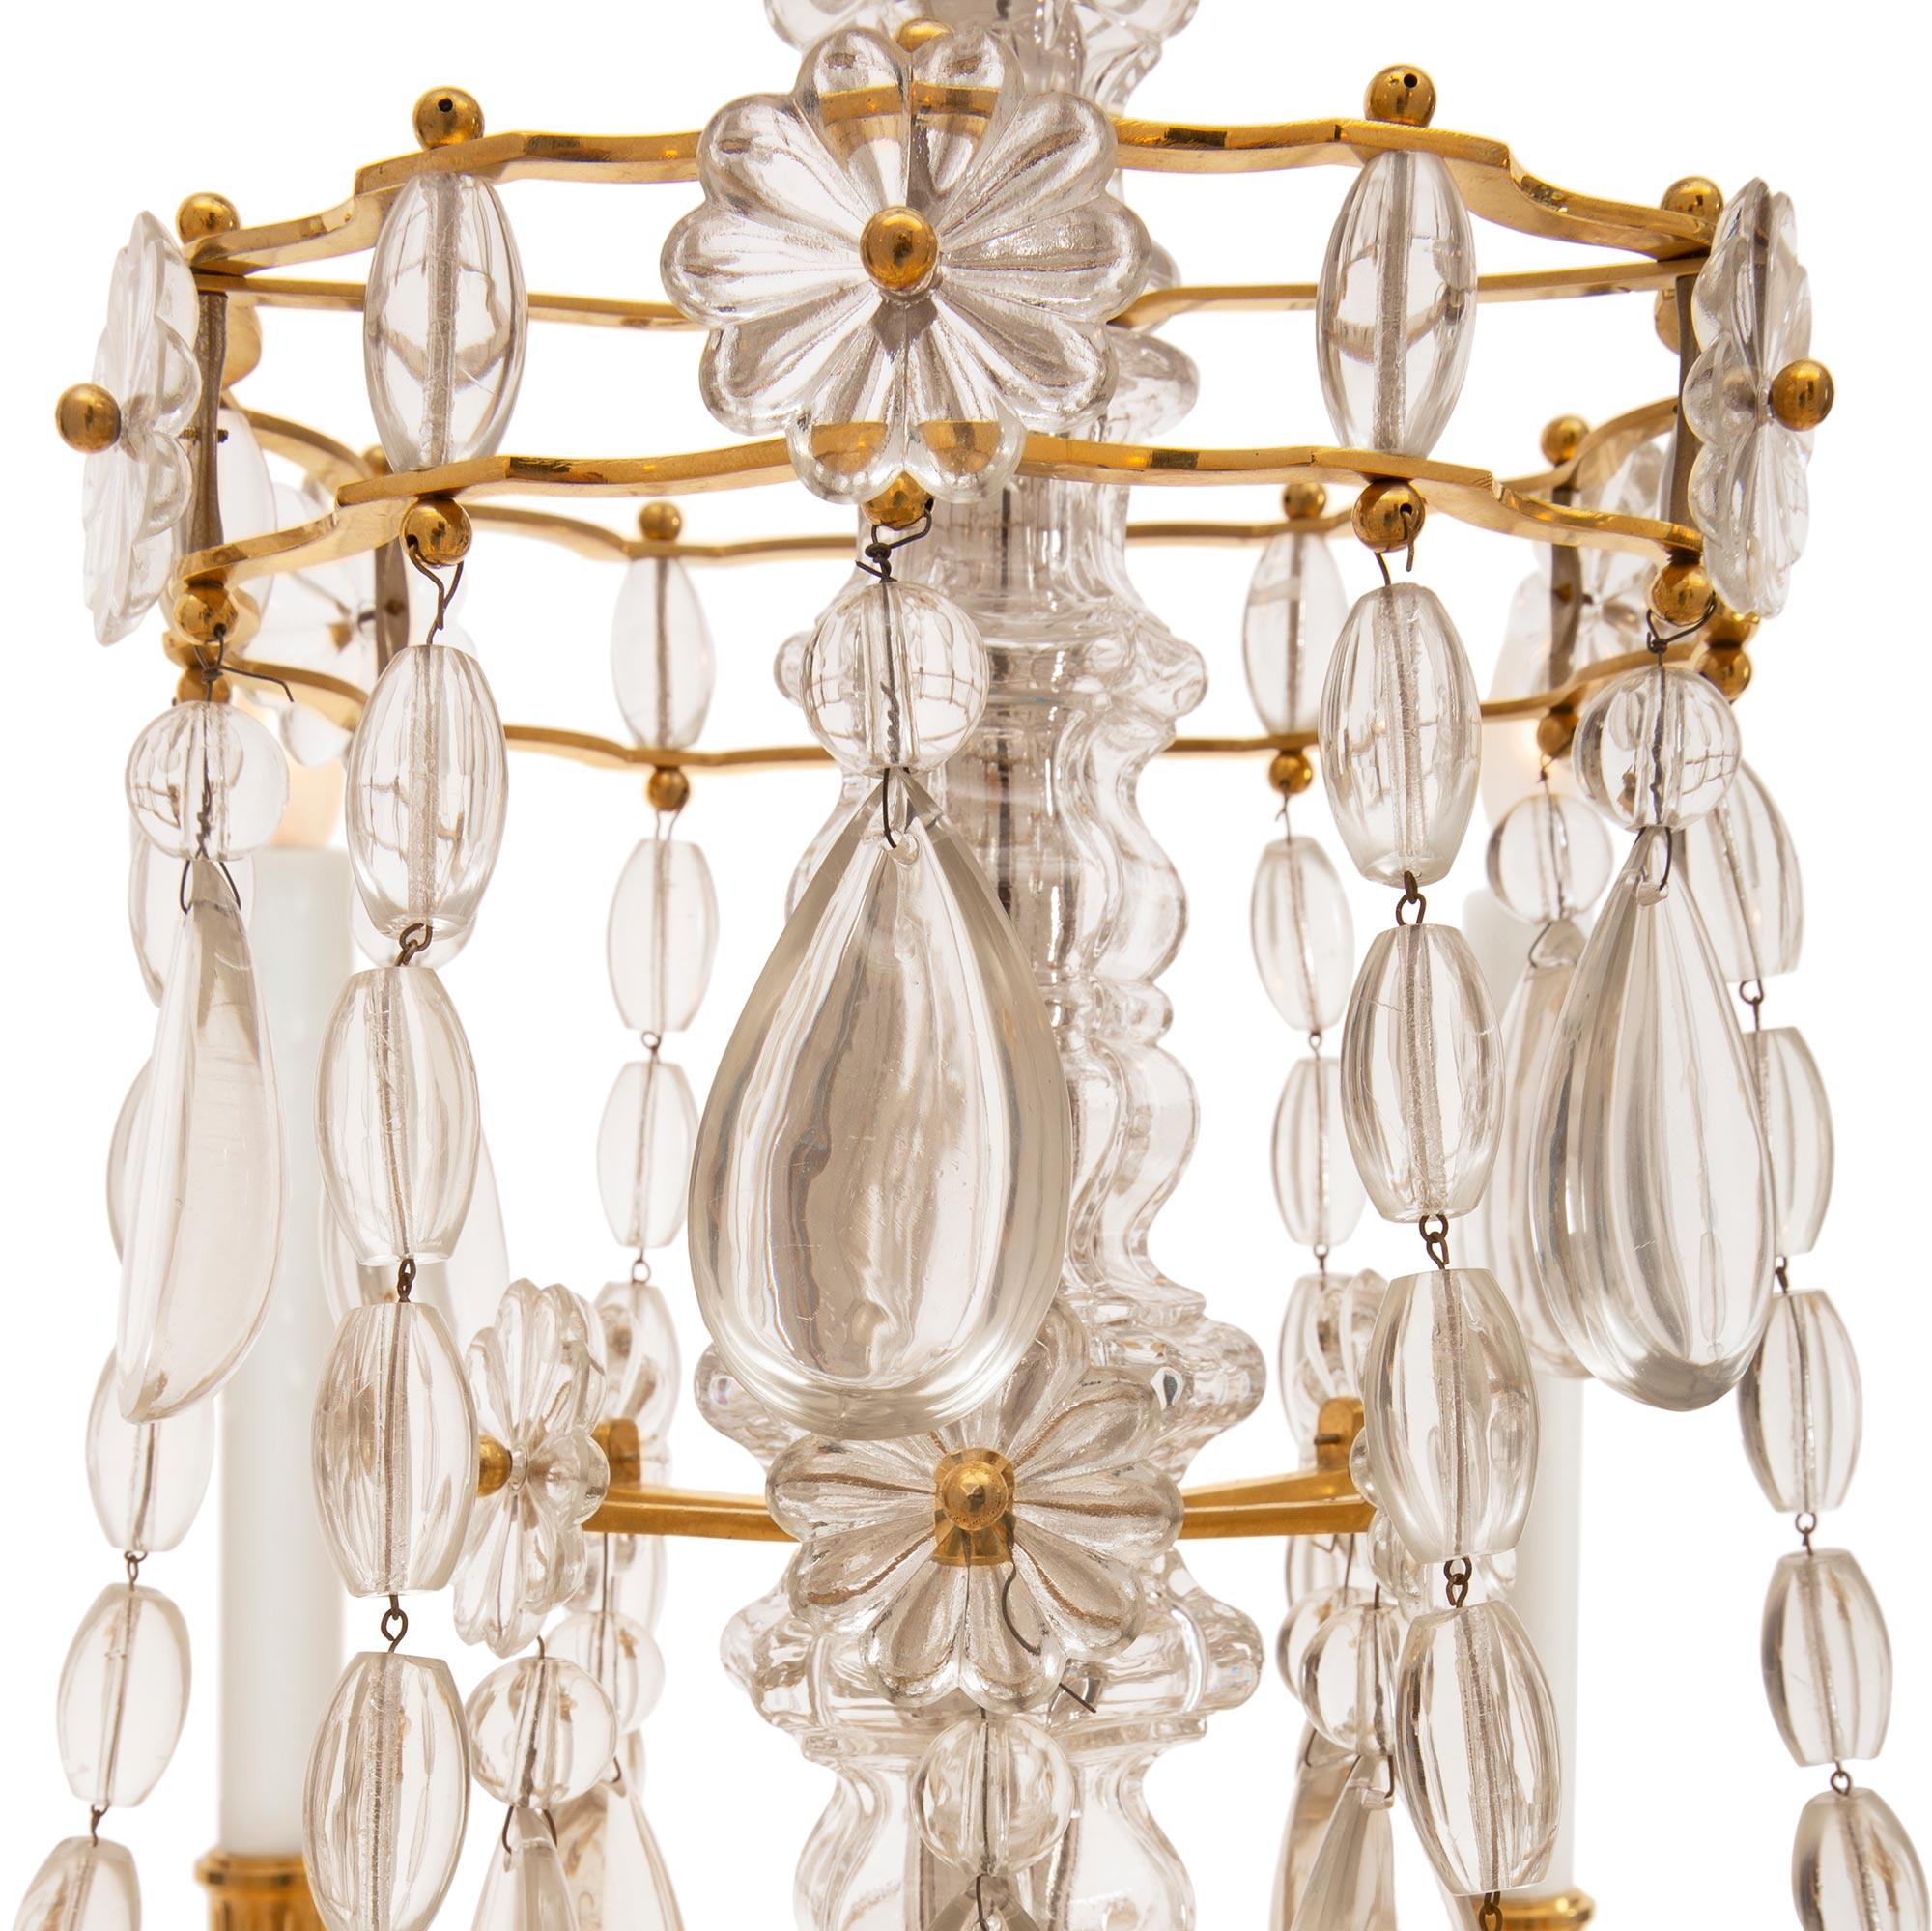 French Mid-19th Century Louis XVI Style Marie Antoinette Crystal Chandelier In Good Condition For Sale In West Palm Beach, FL